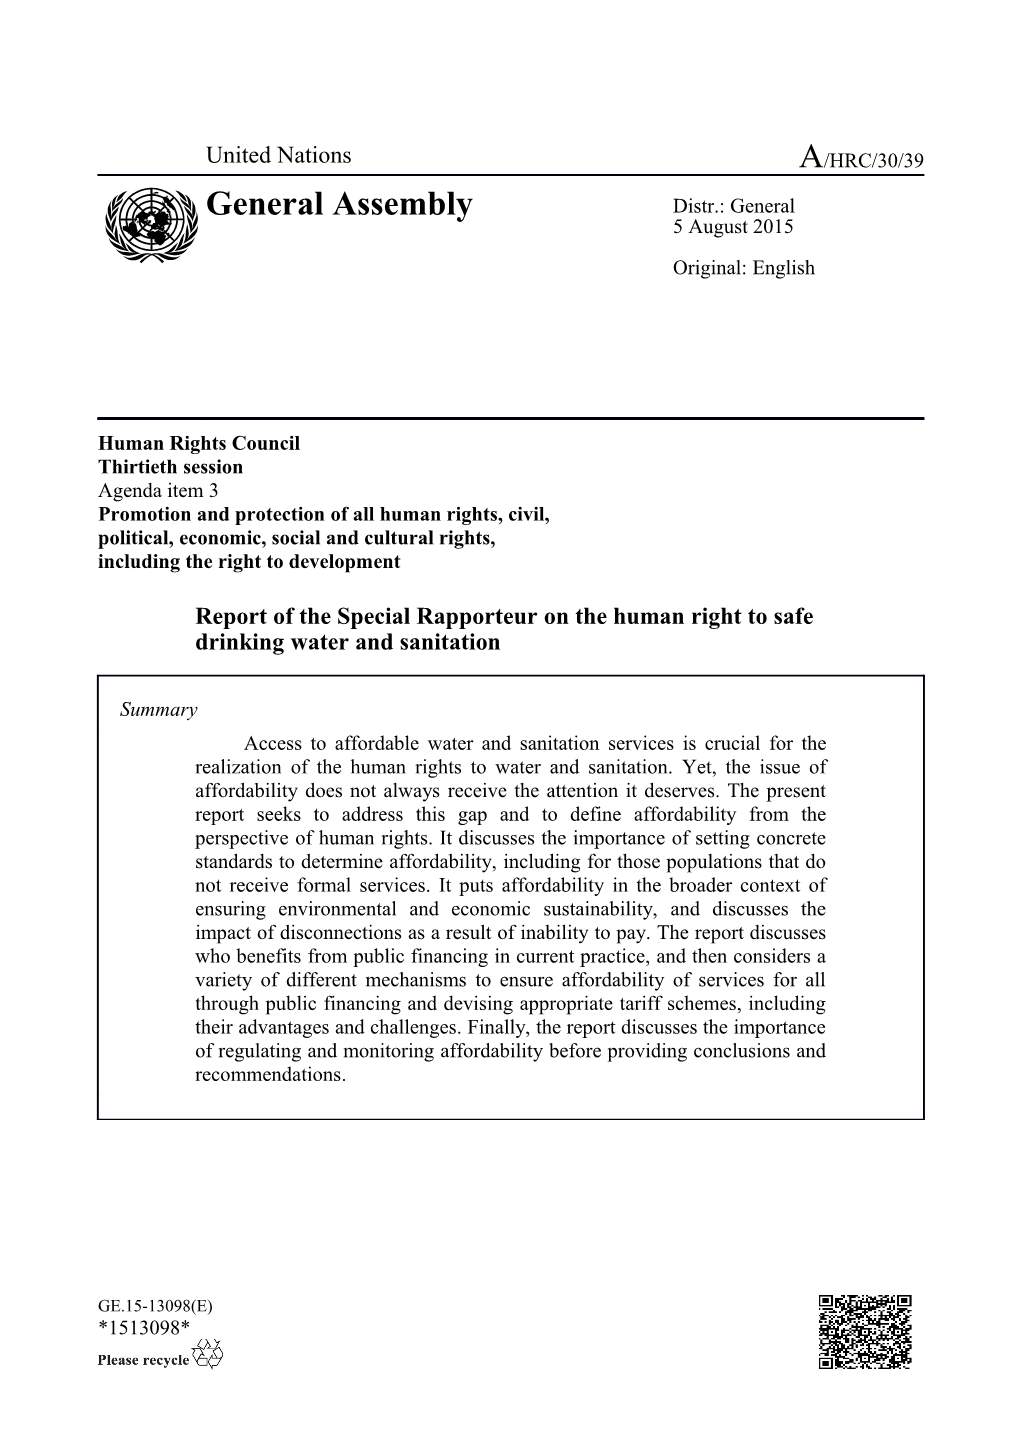 Report of the Special Rapporteur on the Human Right to Safe Drinking Water and Sanitation